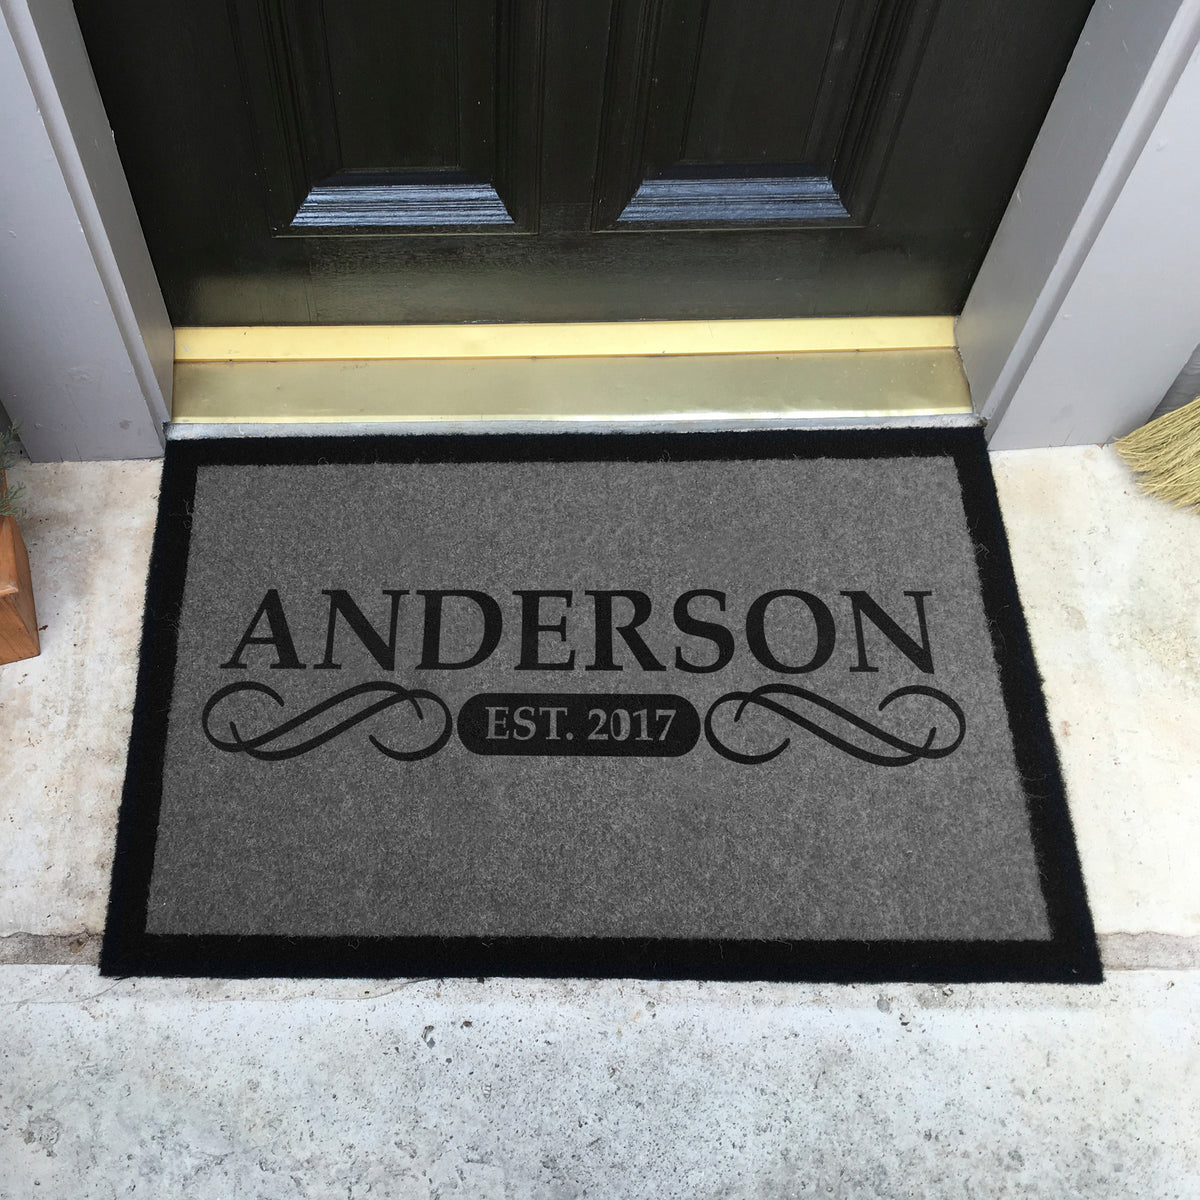 Infinity Custom Mats™ All-Weather Personalized Door Mat - STYLE: ANDERSON COLOR: GREY / BLACK - rugsthatfit.com